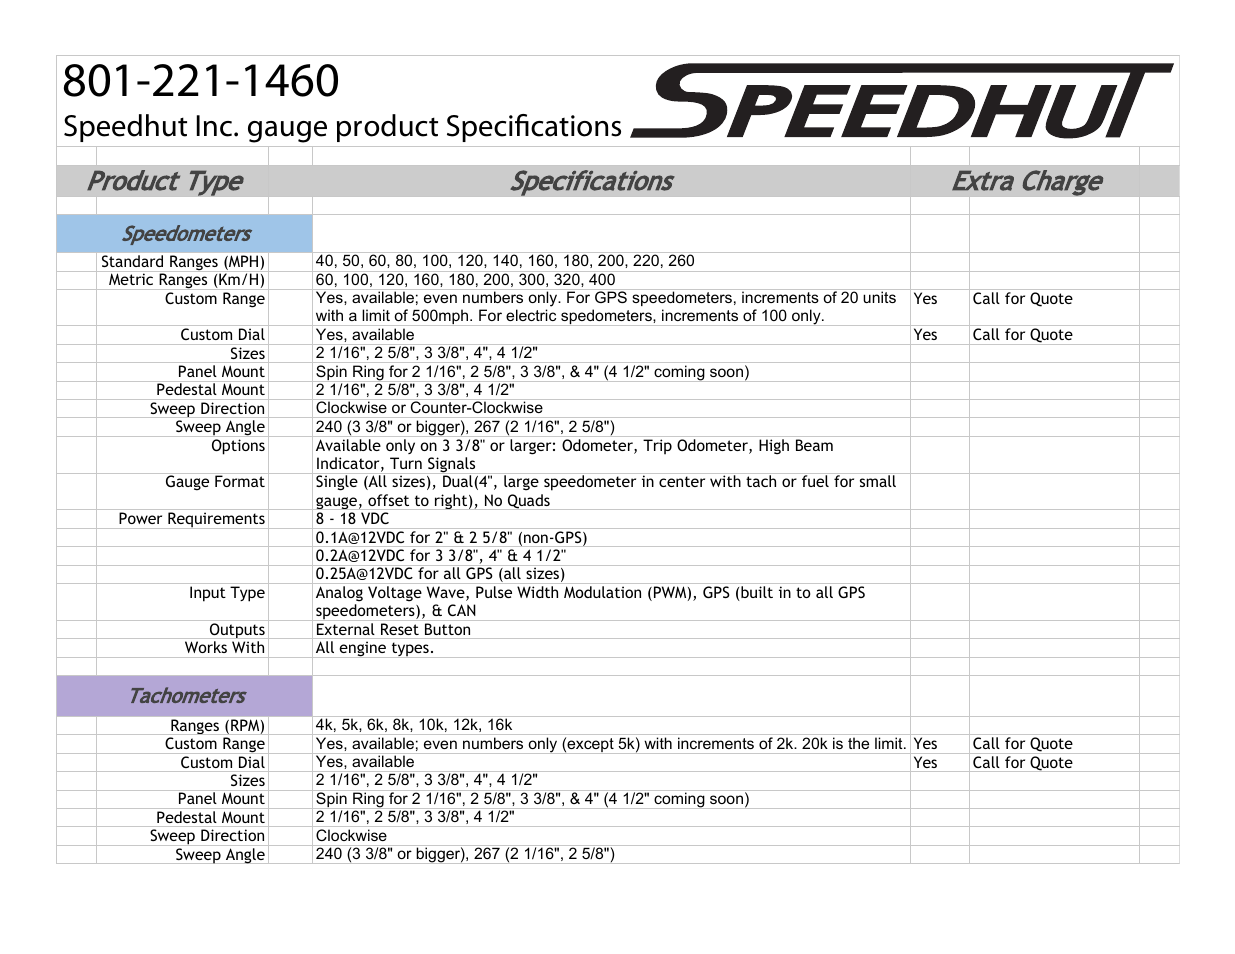 Gauge Capabilities and Specifications